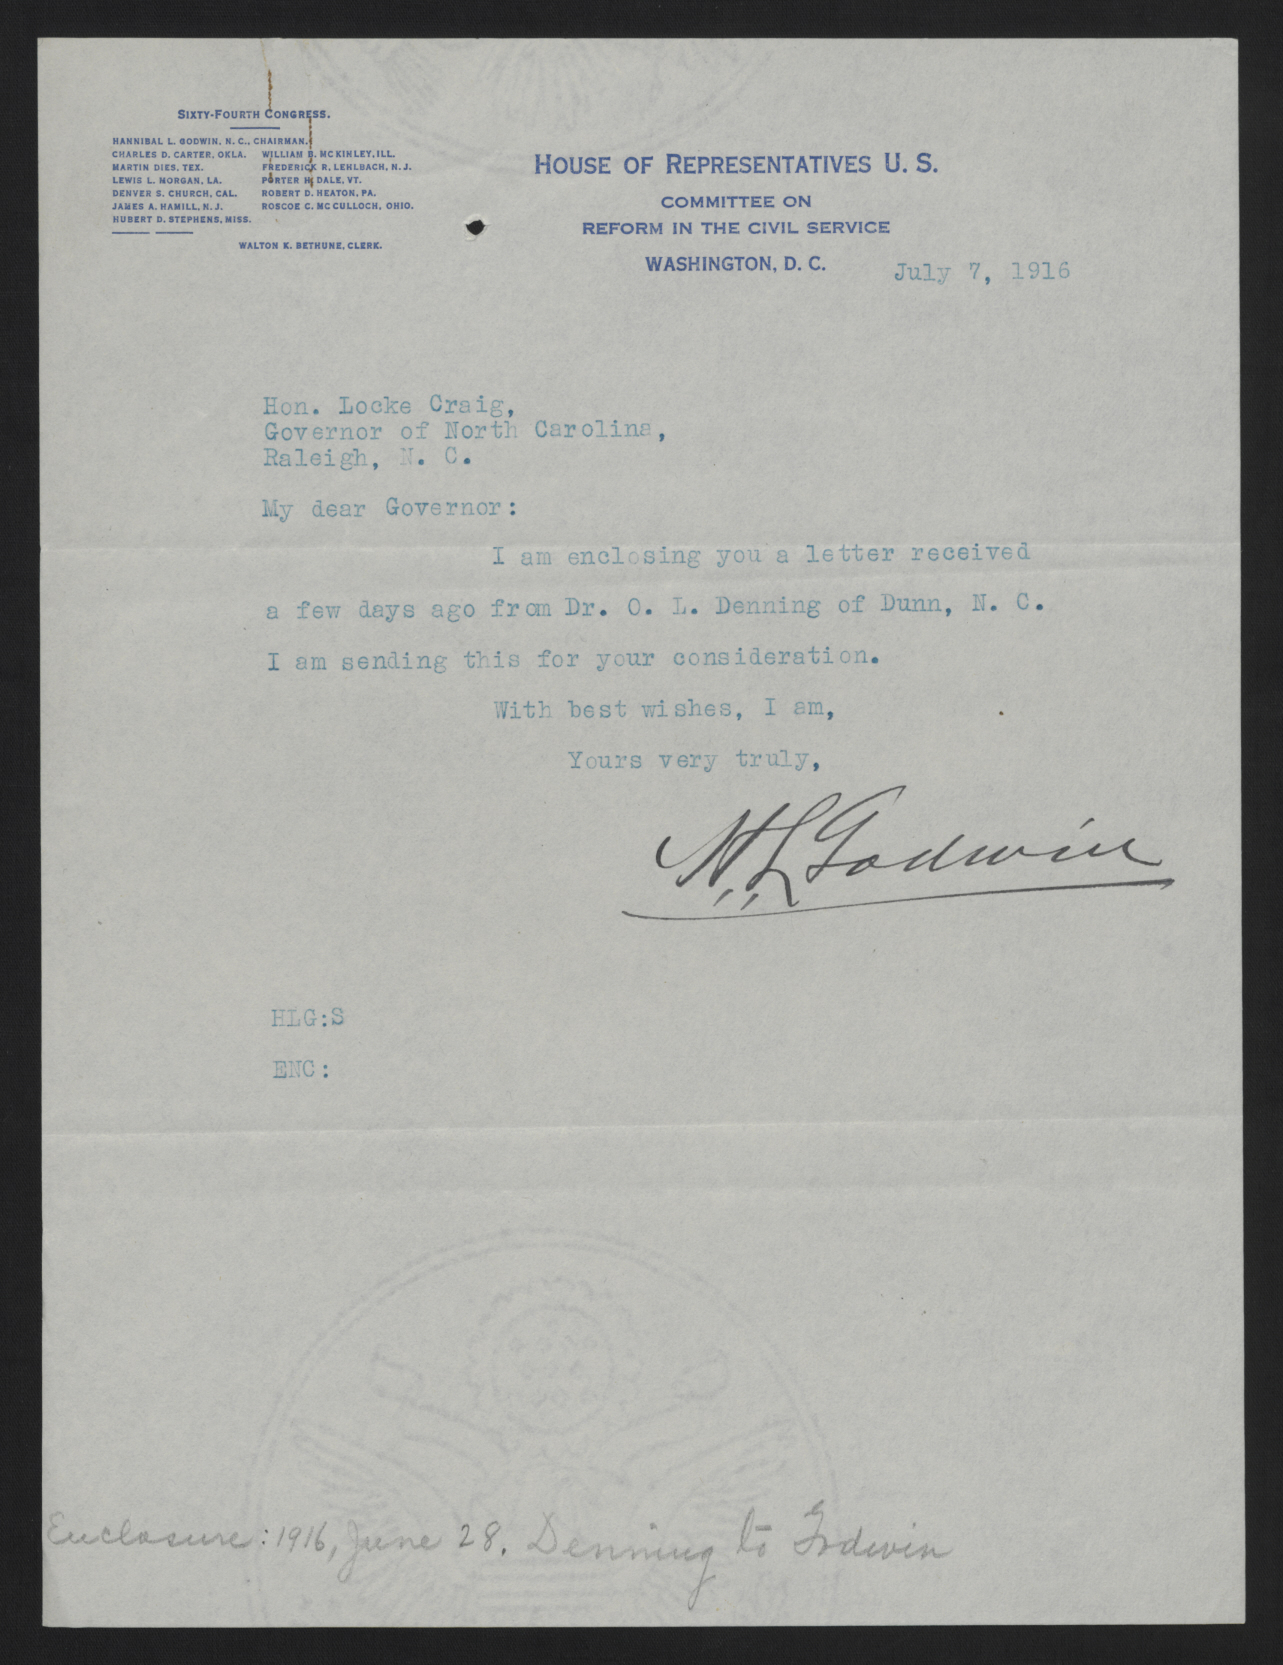 Letter from Godwin to Craig, July 7, 1916